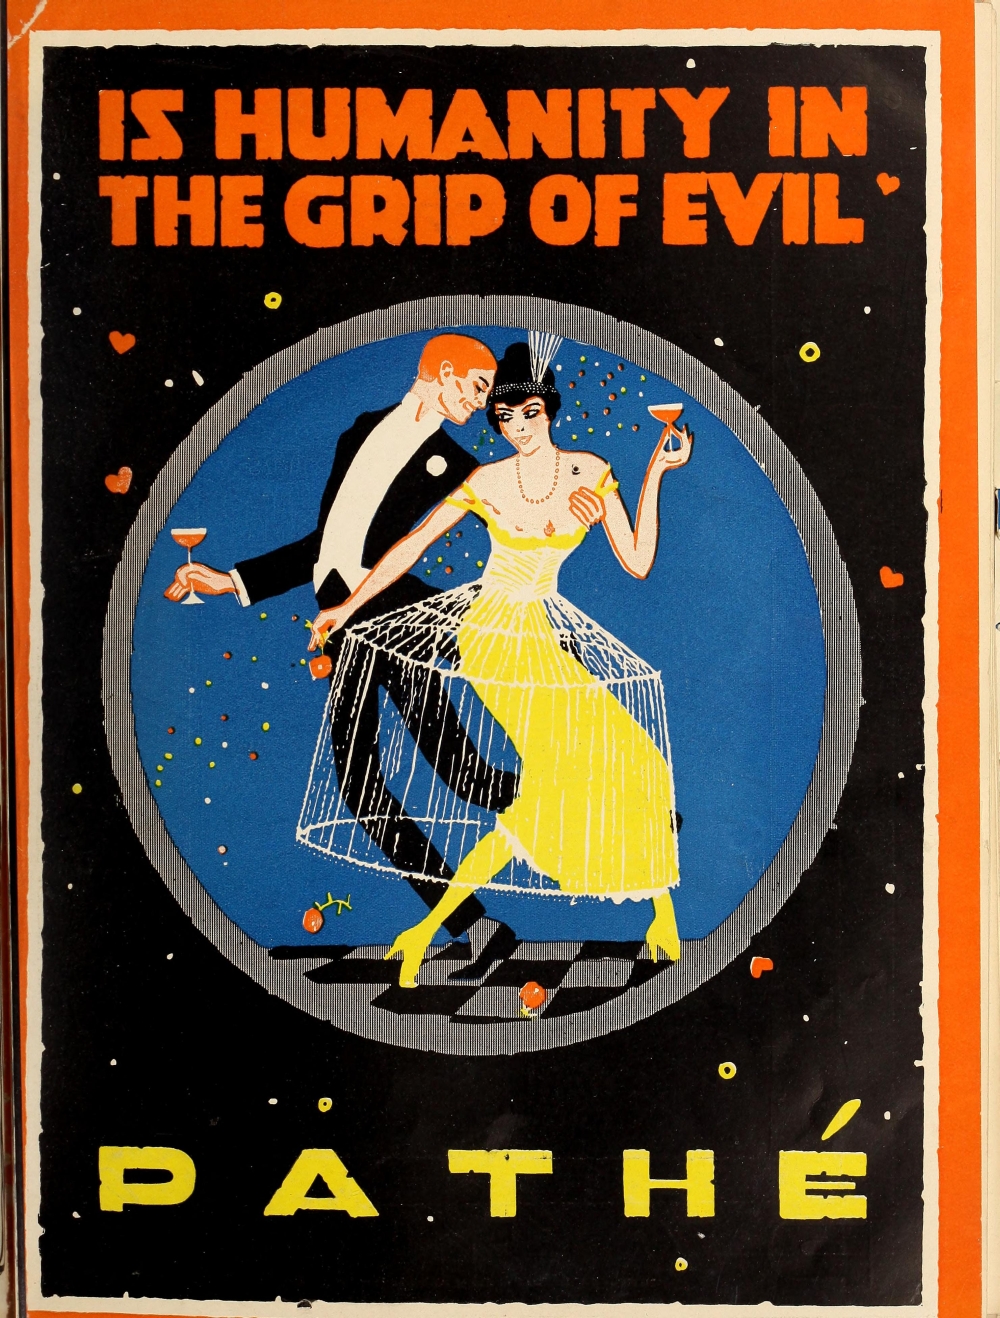 The Grip of Evil